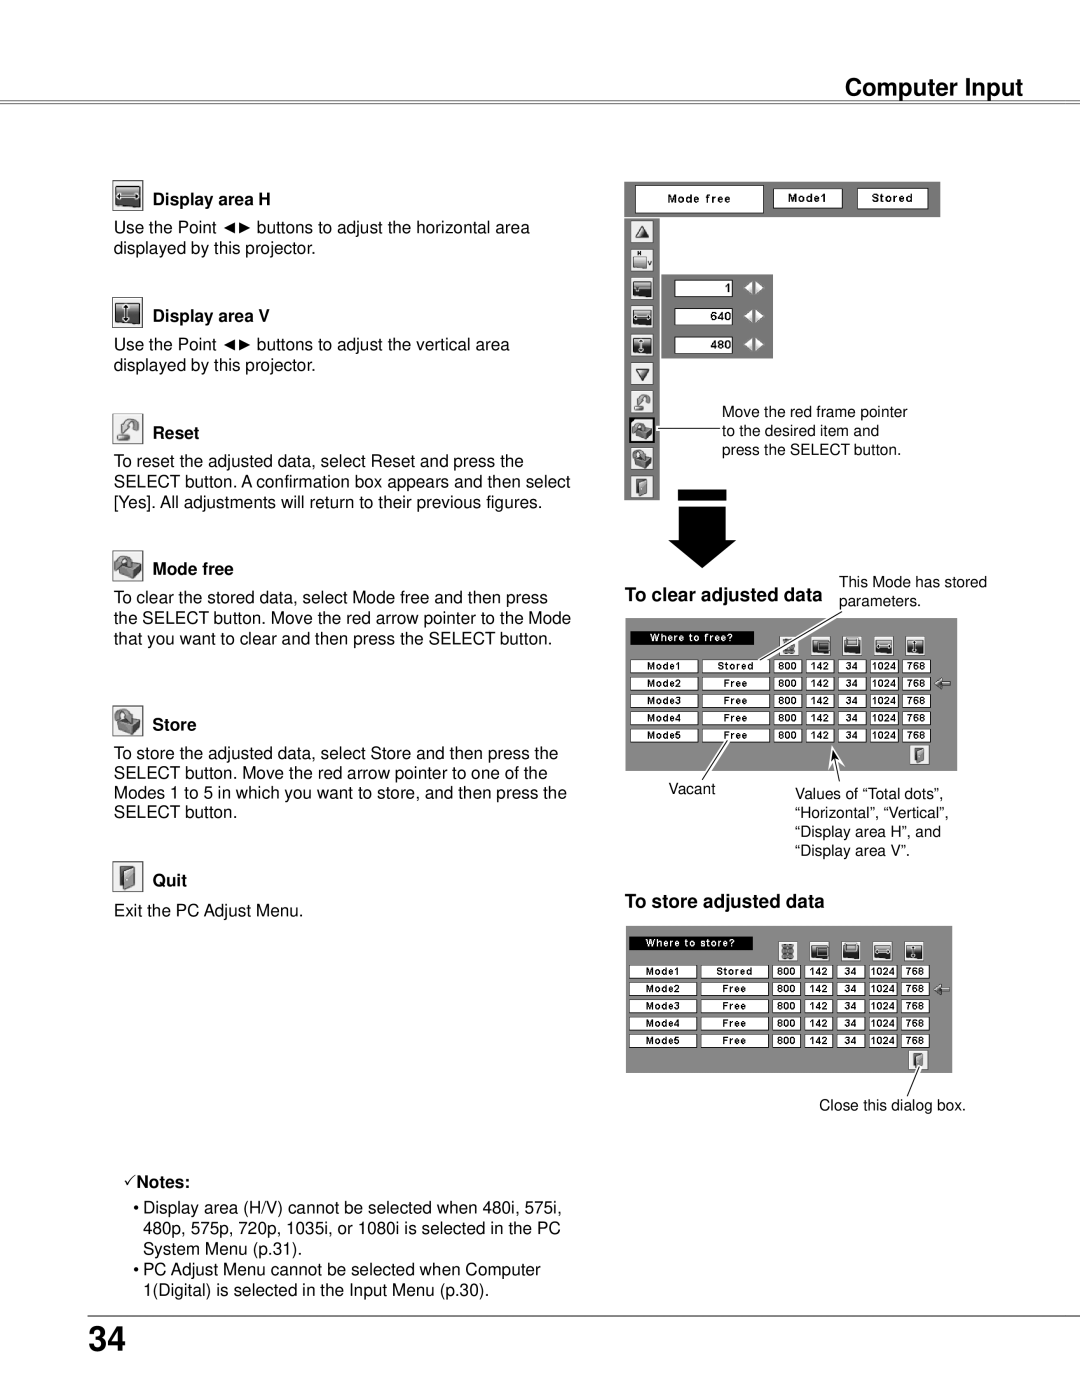 Eiki LC-XB33N owner manual Computer Input, To clear adjusted data parameters, To store adjusted data 